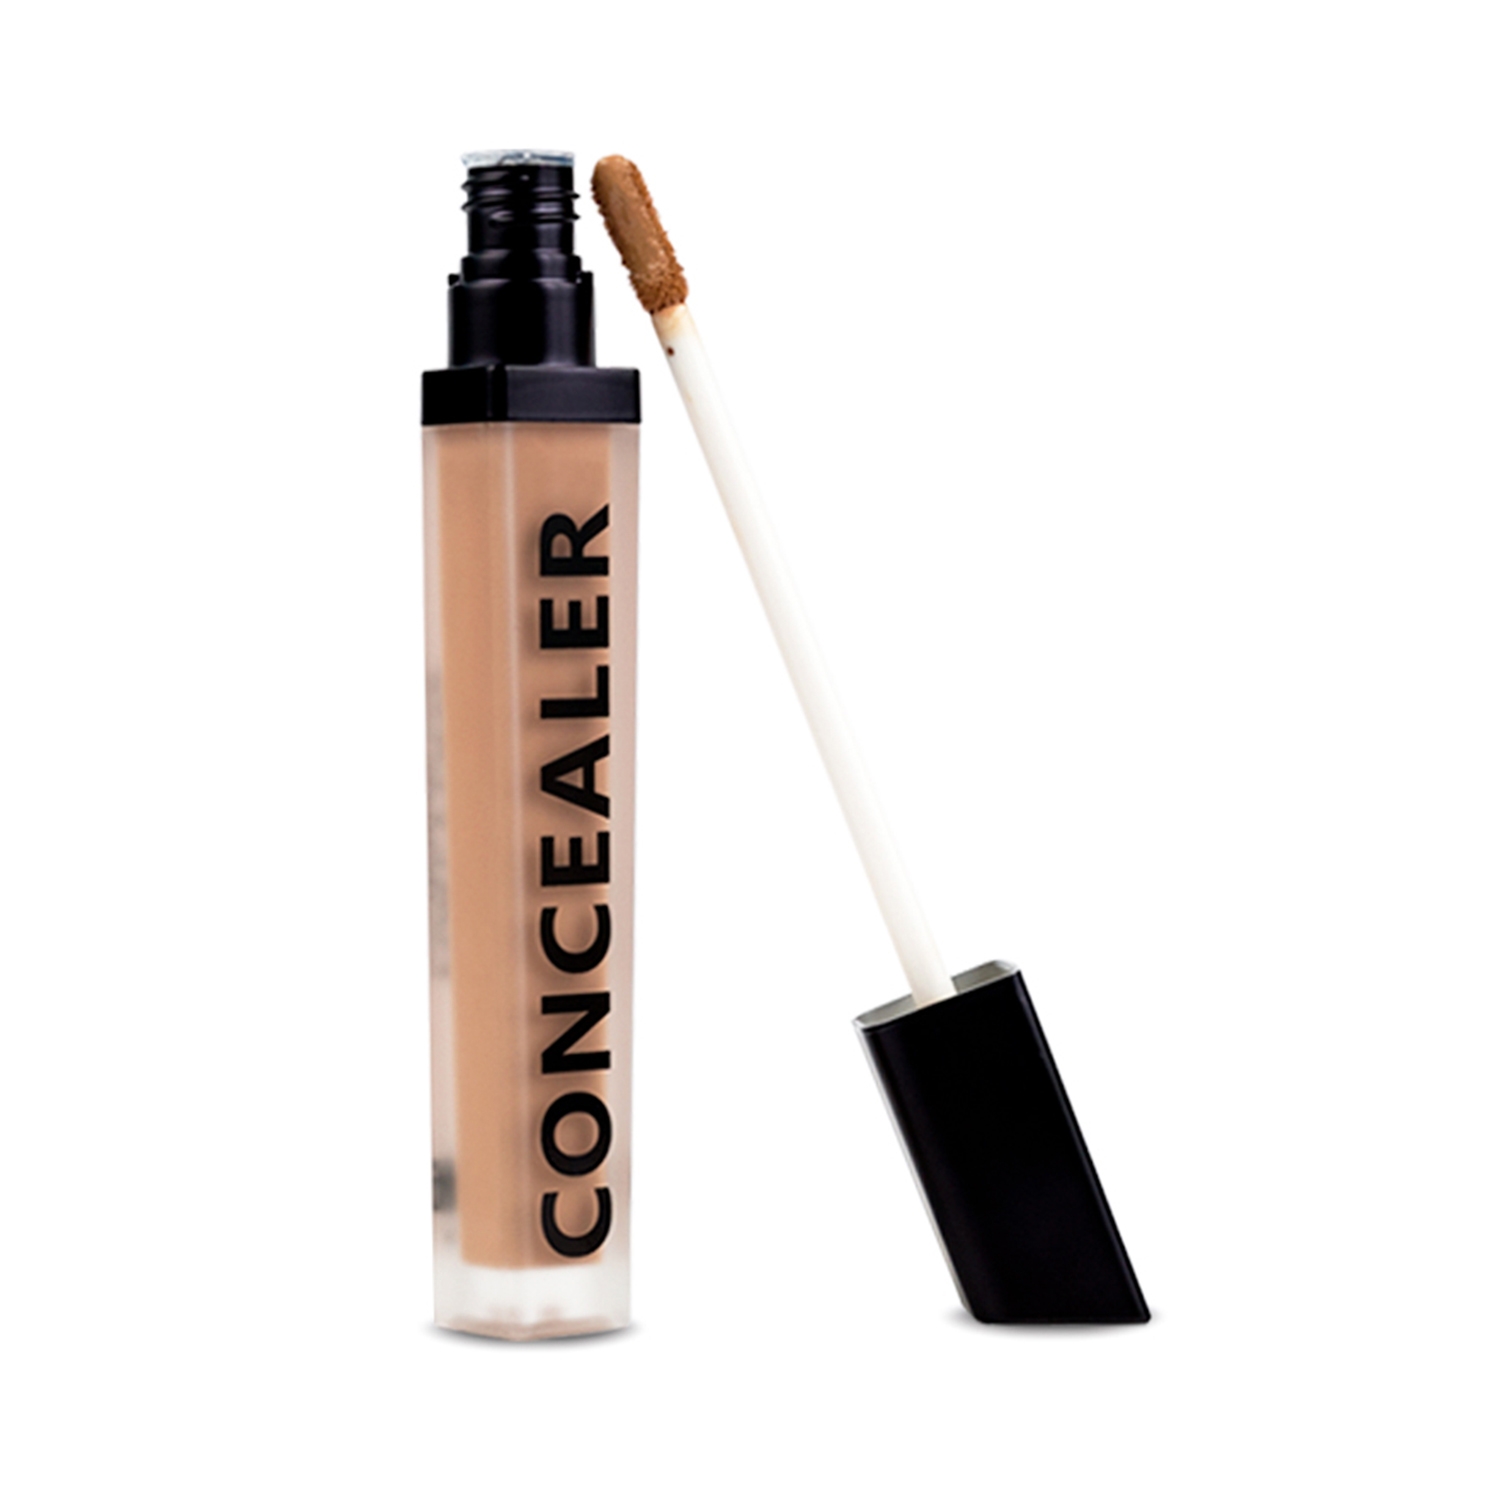 Daily Life Forever52 | Daily Life Forever52 Coverup Concealer CCU30.1 - Golden Tan (7ml)